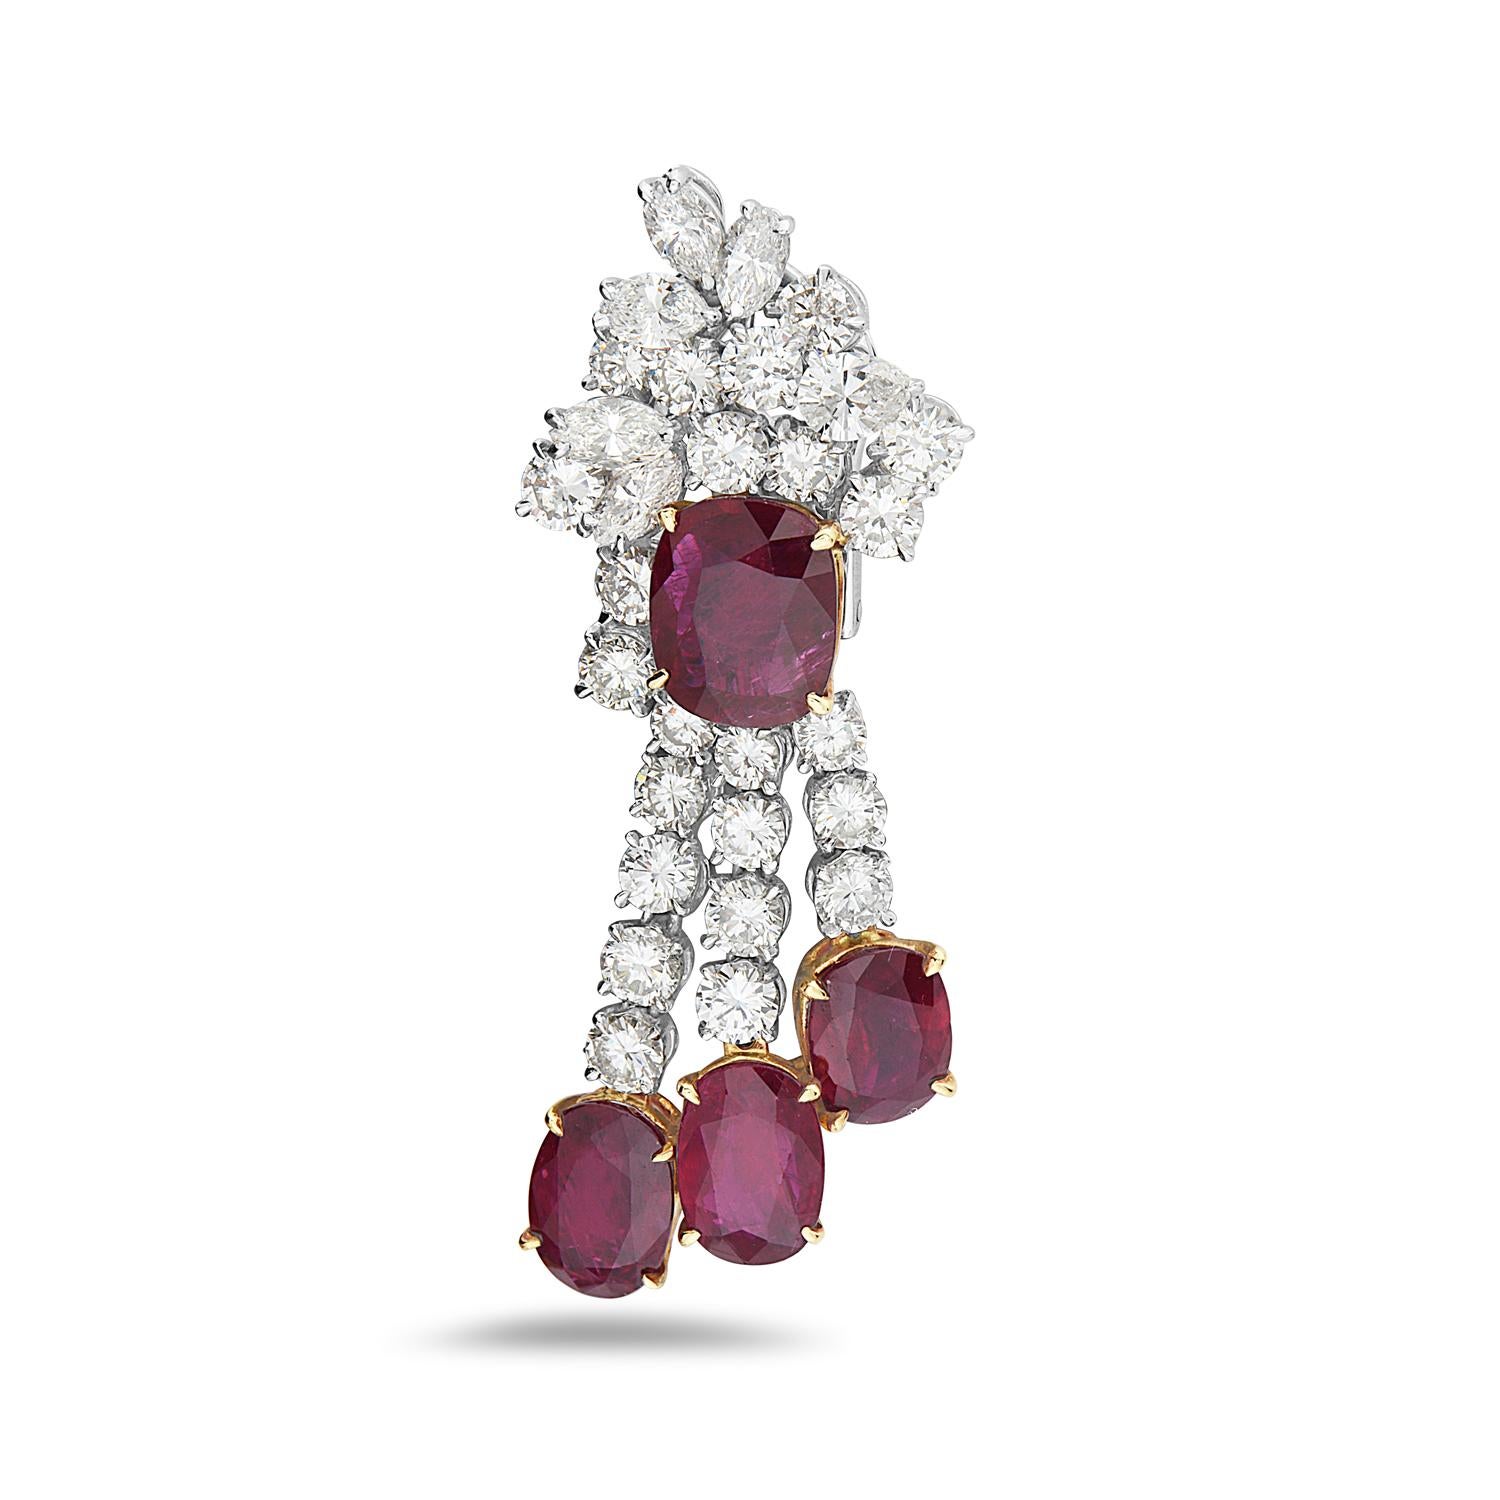 These chandelier earrings feature 18.79 carats of transparent moderately strong red rubies and 8.85 carats of F-H VS-SI pear, marquise, and round cut diamonds. These dazzling earrings feature 2 pear brilliant, 10 marquise brilliant, and 46 round